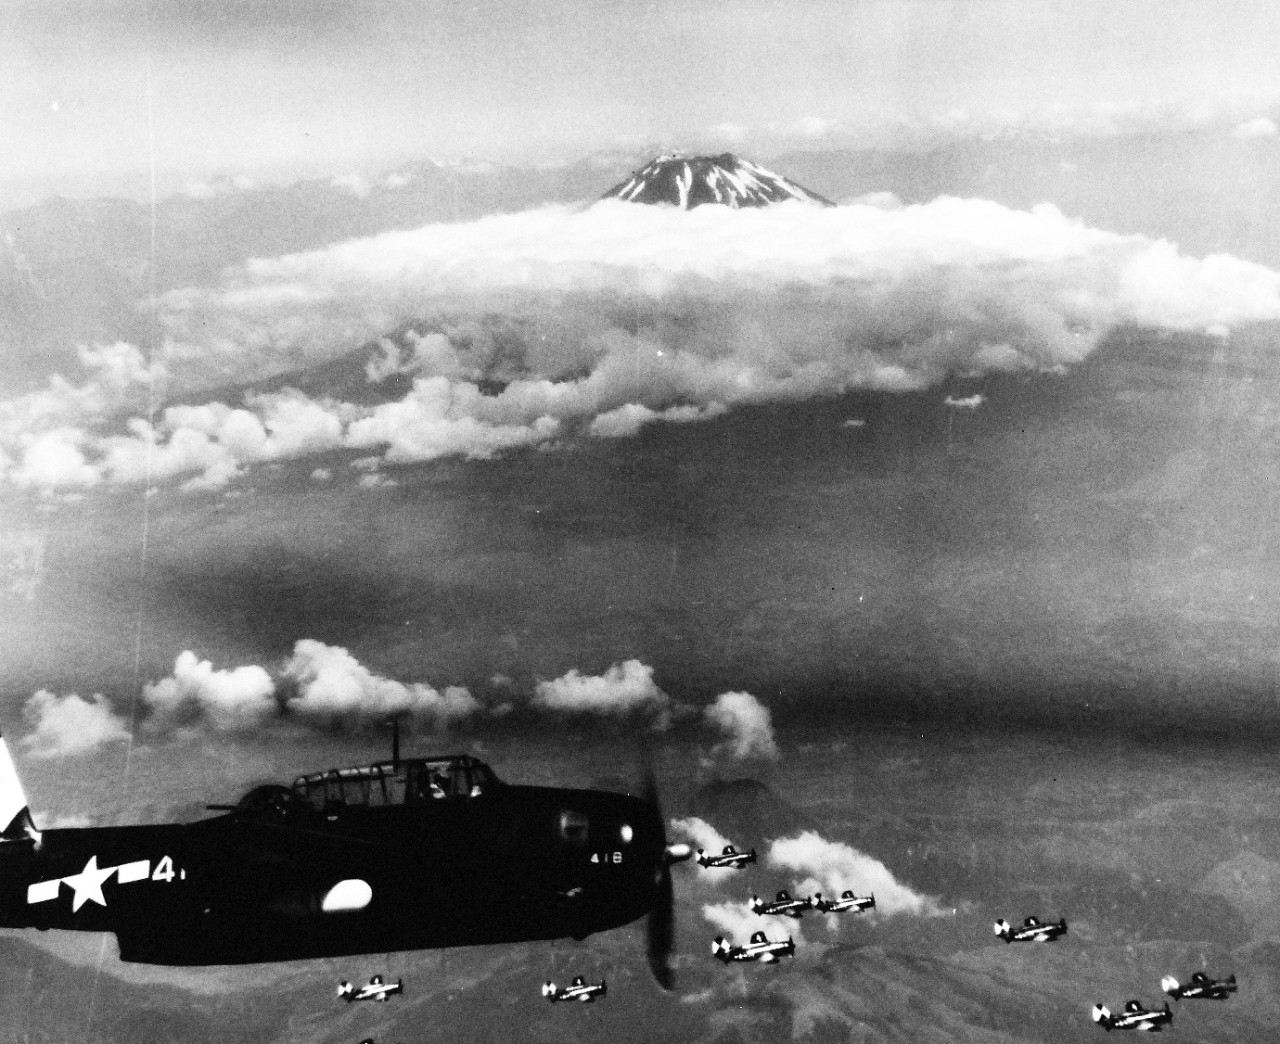 80-G-490231:  Raids on Japanese Home Islands, July 10, 1945.  USS Essex (CV-9) based TBMs and SB2Cs with Mt. Fujiyama, Japan, in the background.  Photograph released July 10, 1945.  U.S. Navy Photograph, now in the collections of the National Archives. (2015/12/08).